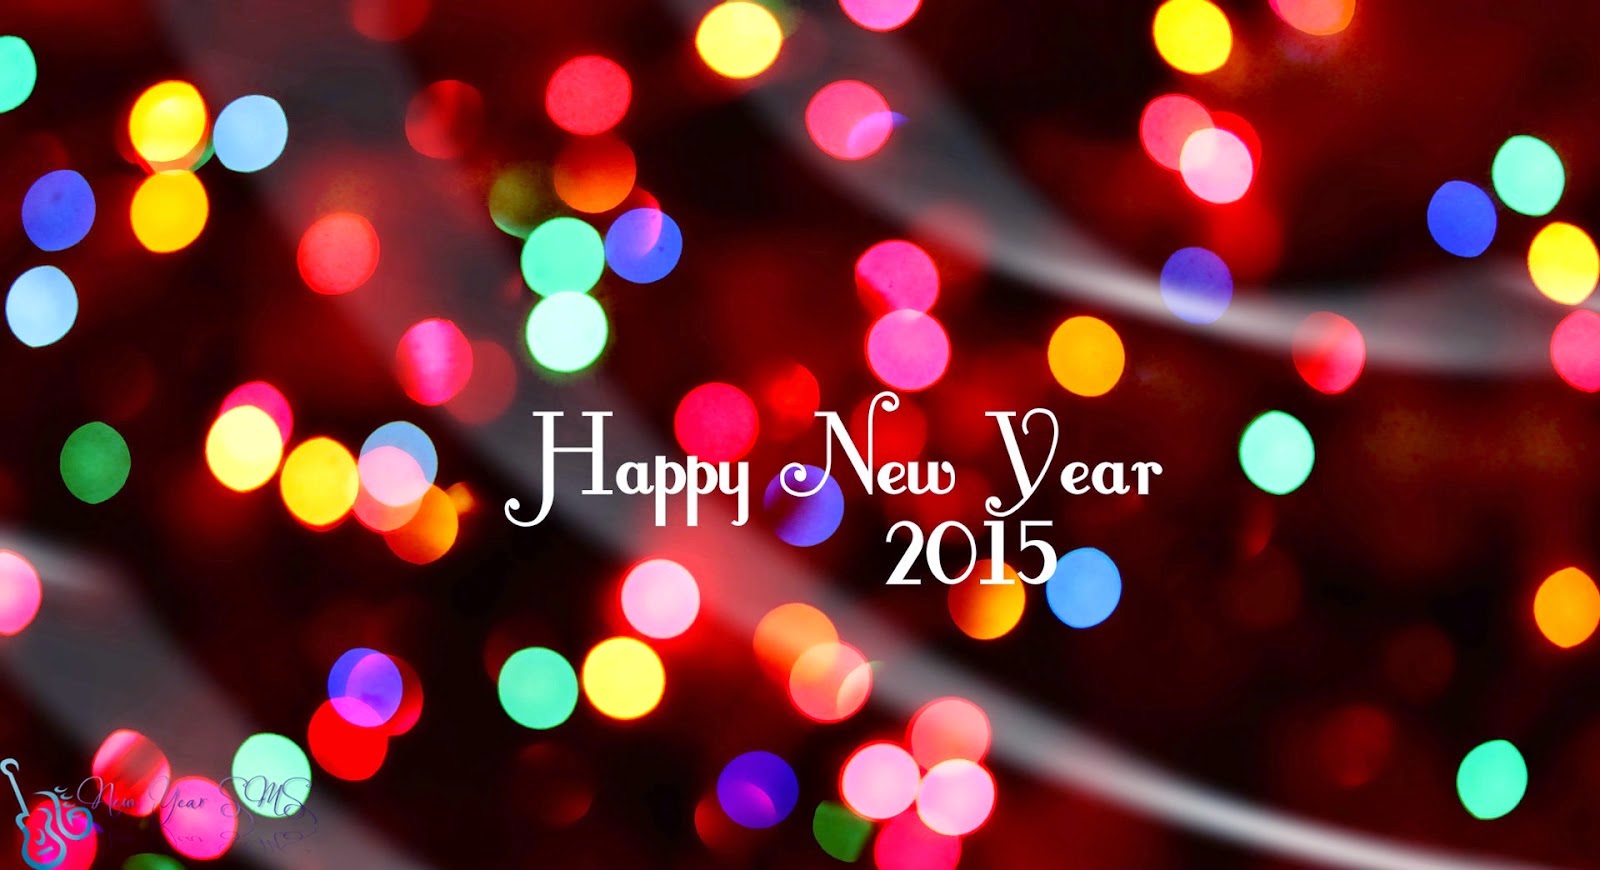 20 Best Colorful Happy New Year Wallpapers 2015 Smash Blog Trends